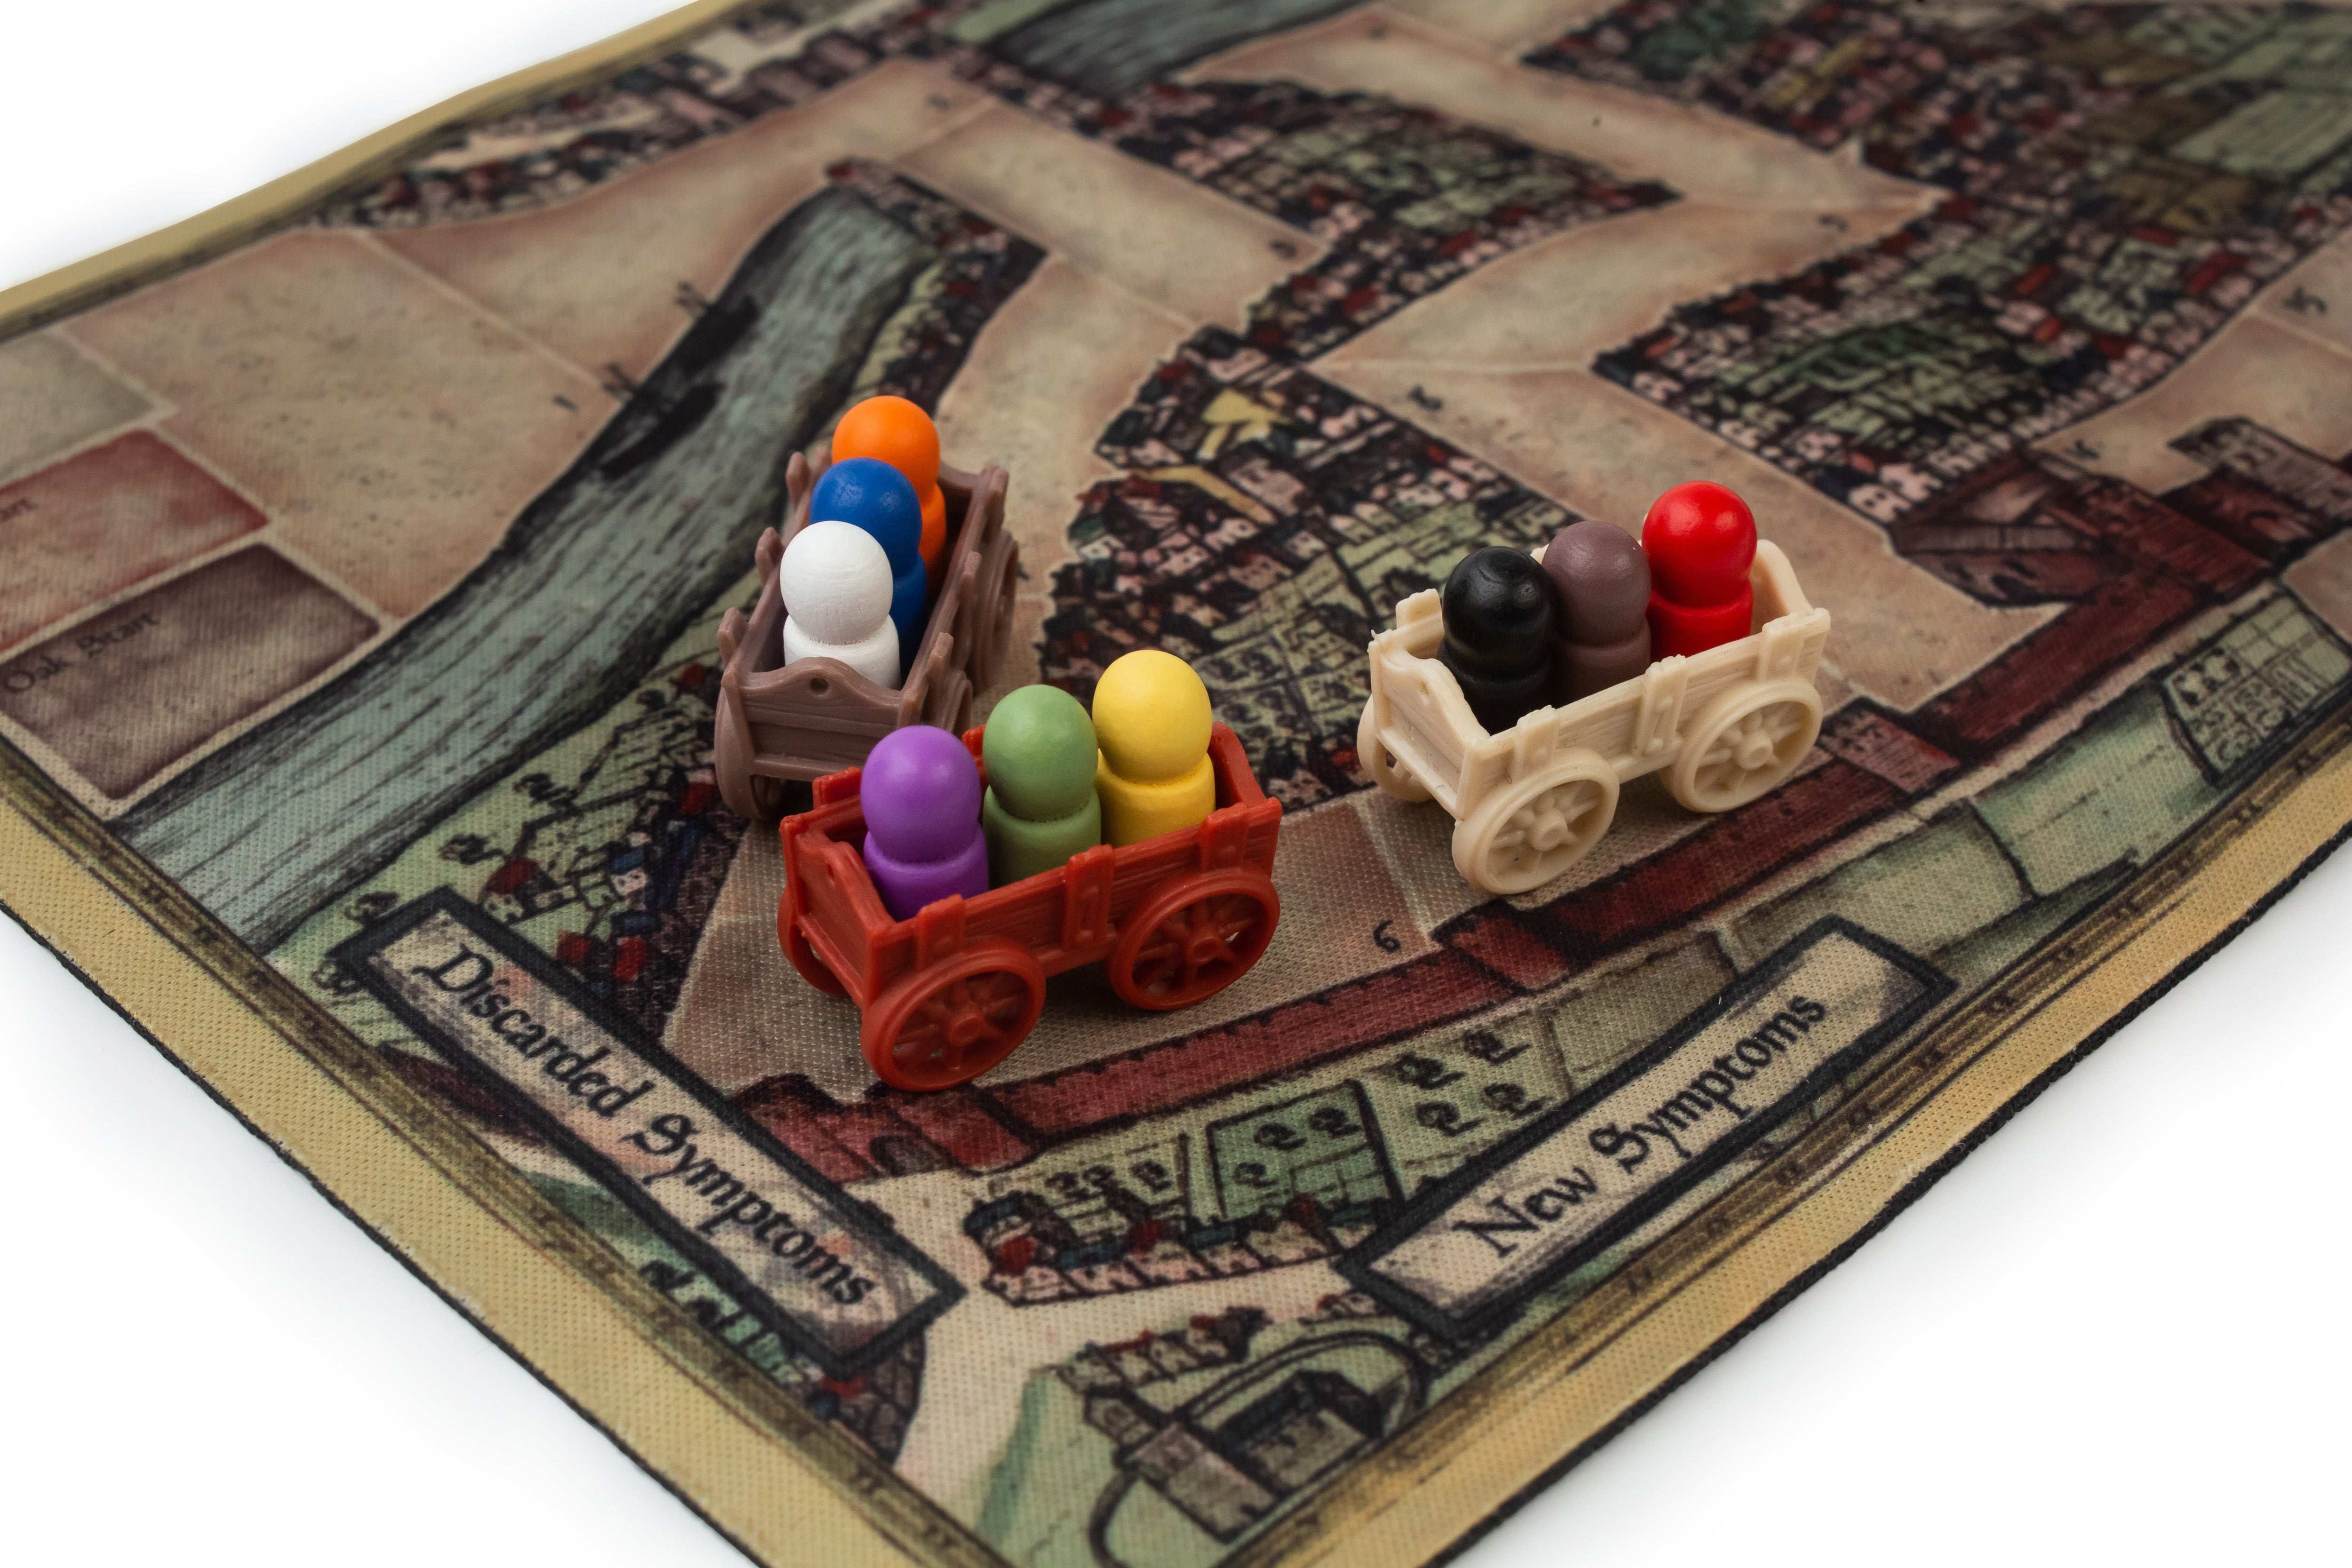 Bristol 1350 Board Game of Strategy, Deceit, and Luck for 1-9 Players